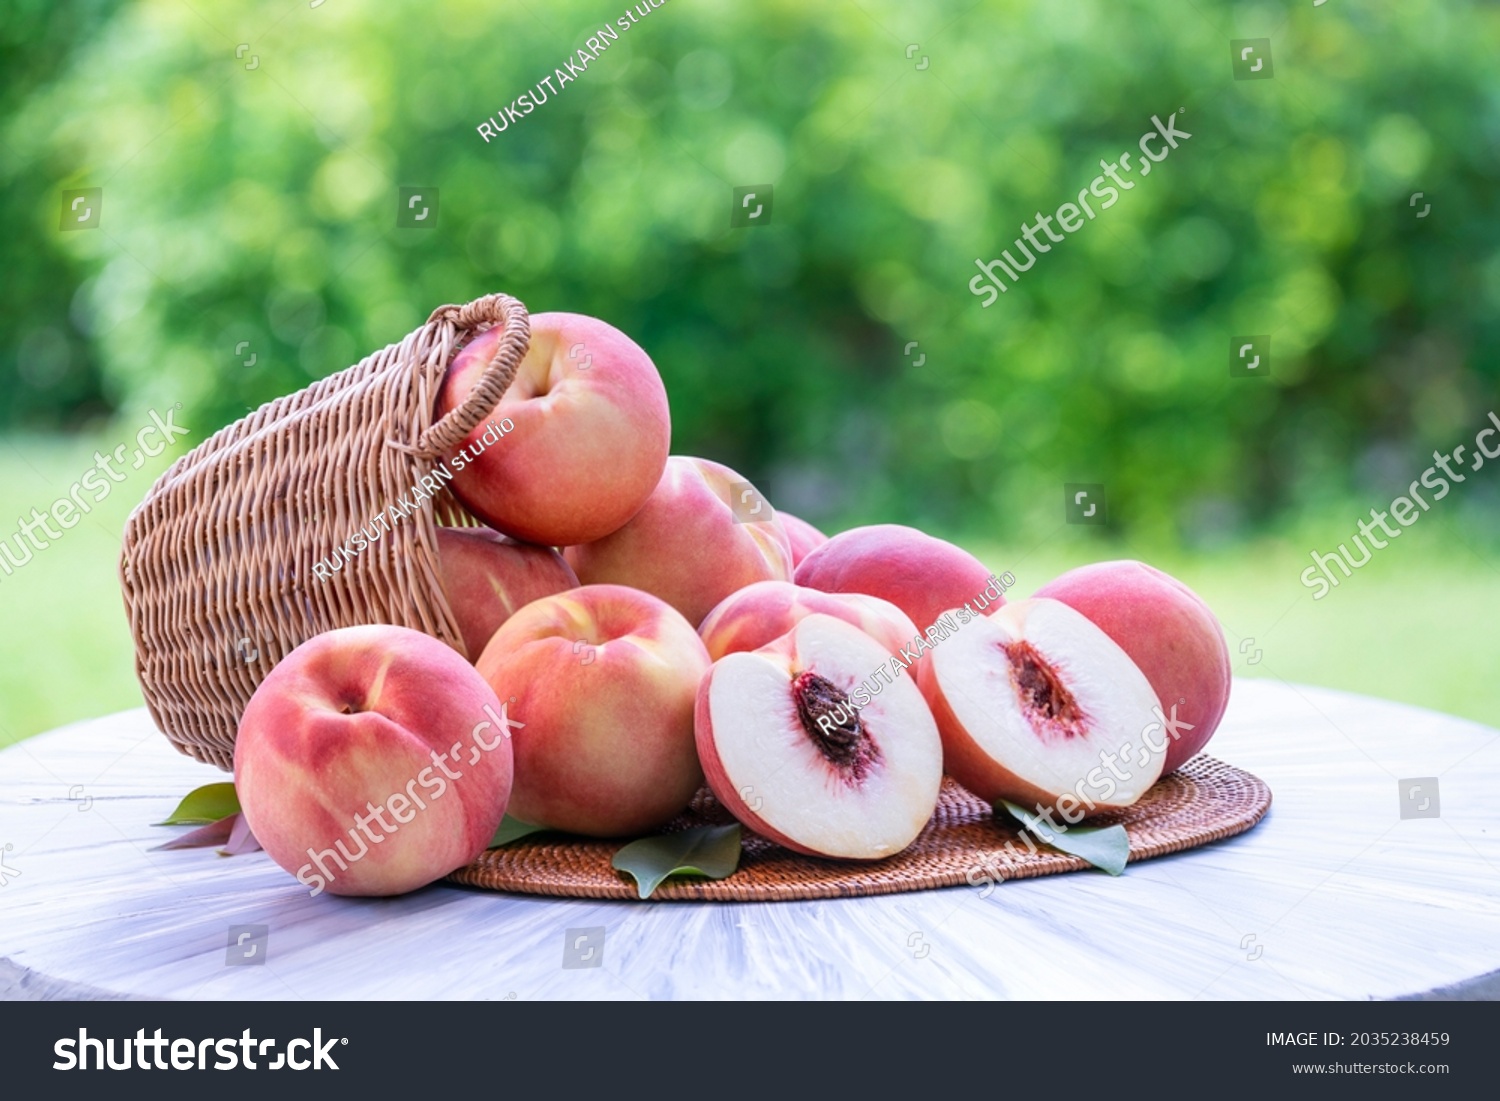 Fresh peach with slices on blurred greenery background, Peach fruit in Bamboo basket on wooden table in garden. #2035238459